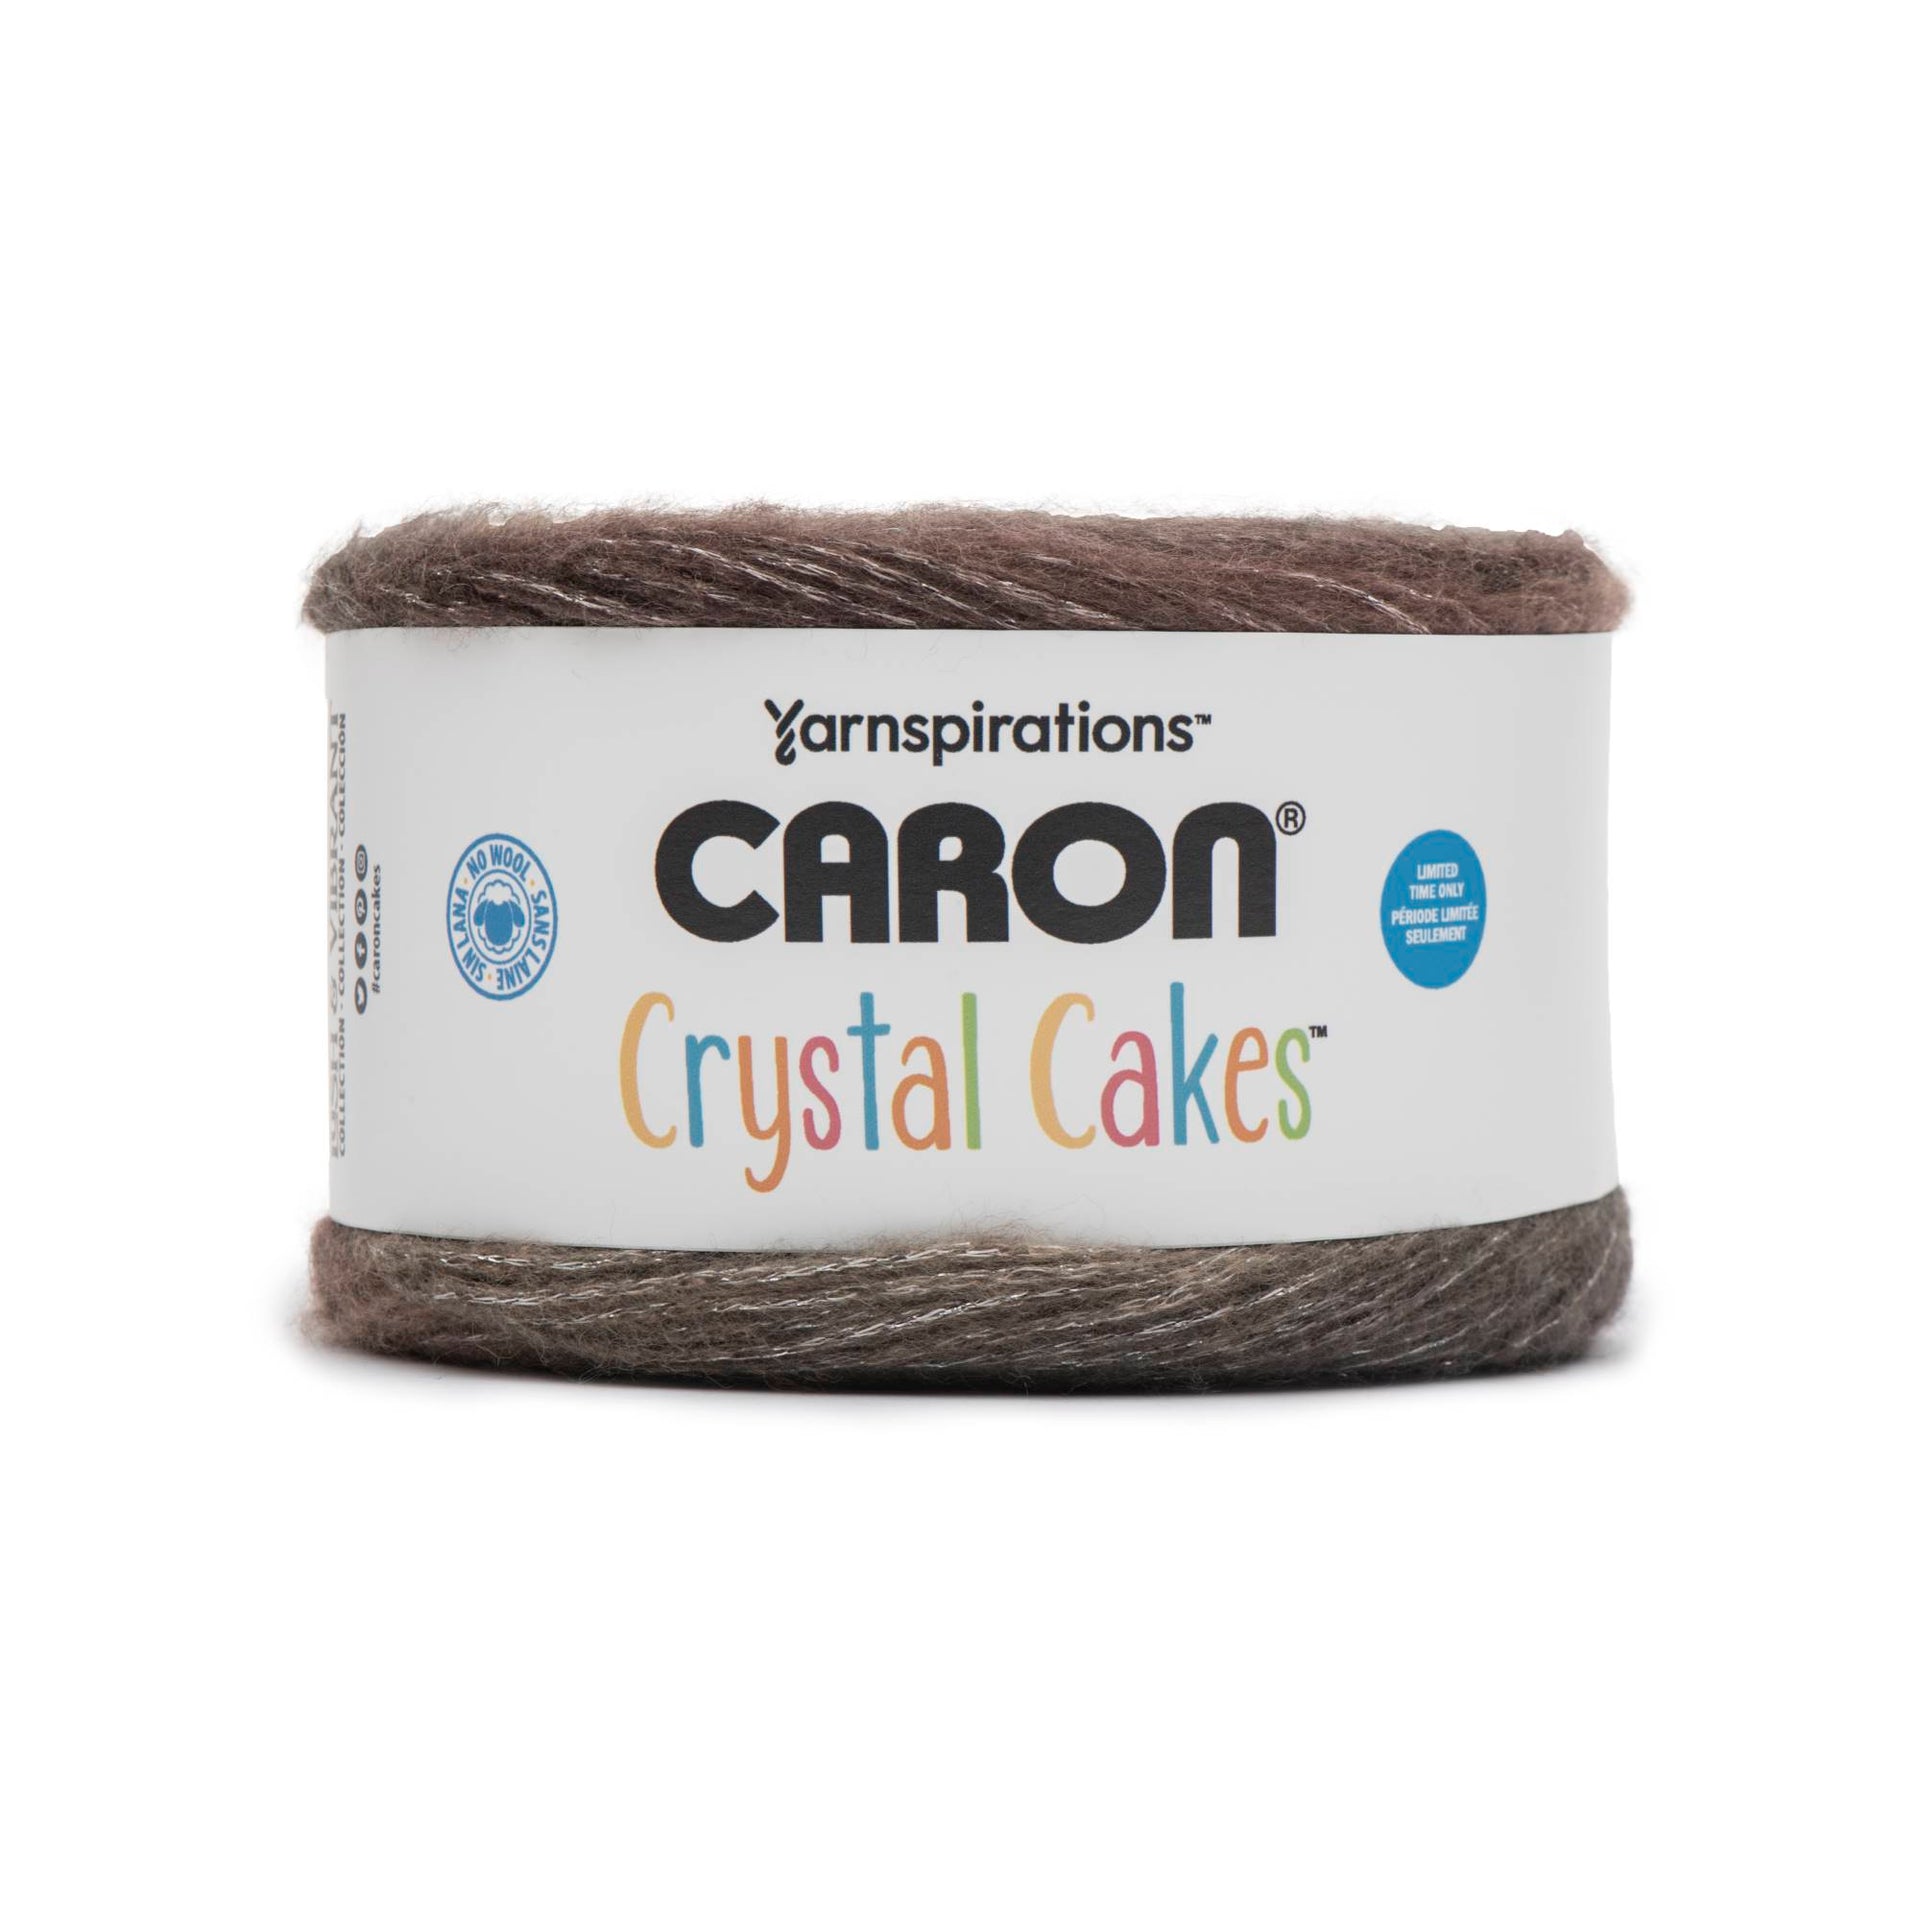 Caron Cakes ~ A Yarn Review - Crystalized Designs